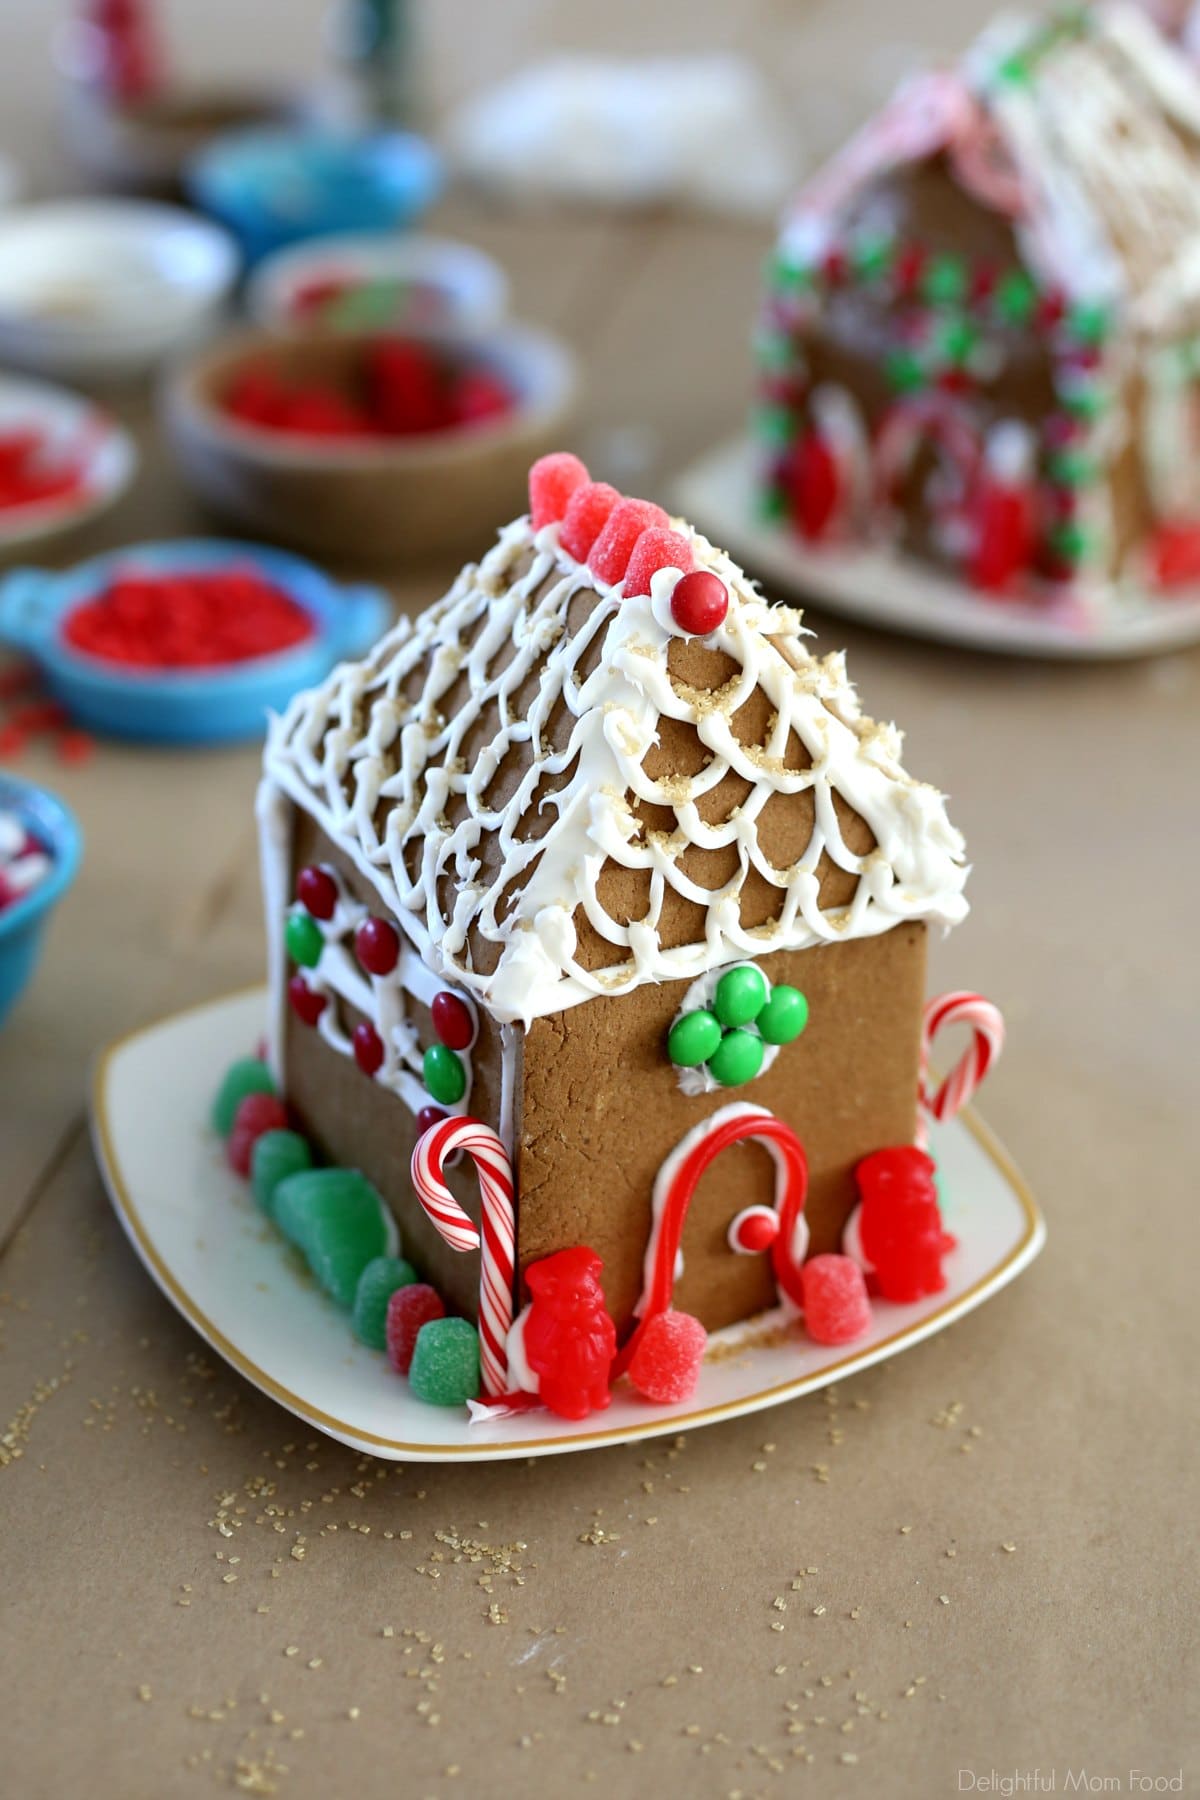 Decorated gluten-free gingerbread house recipe